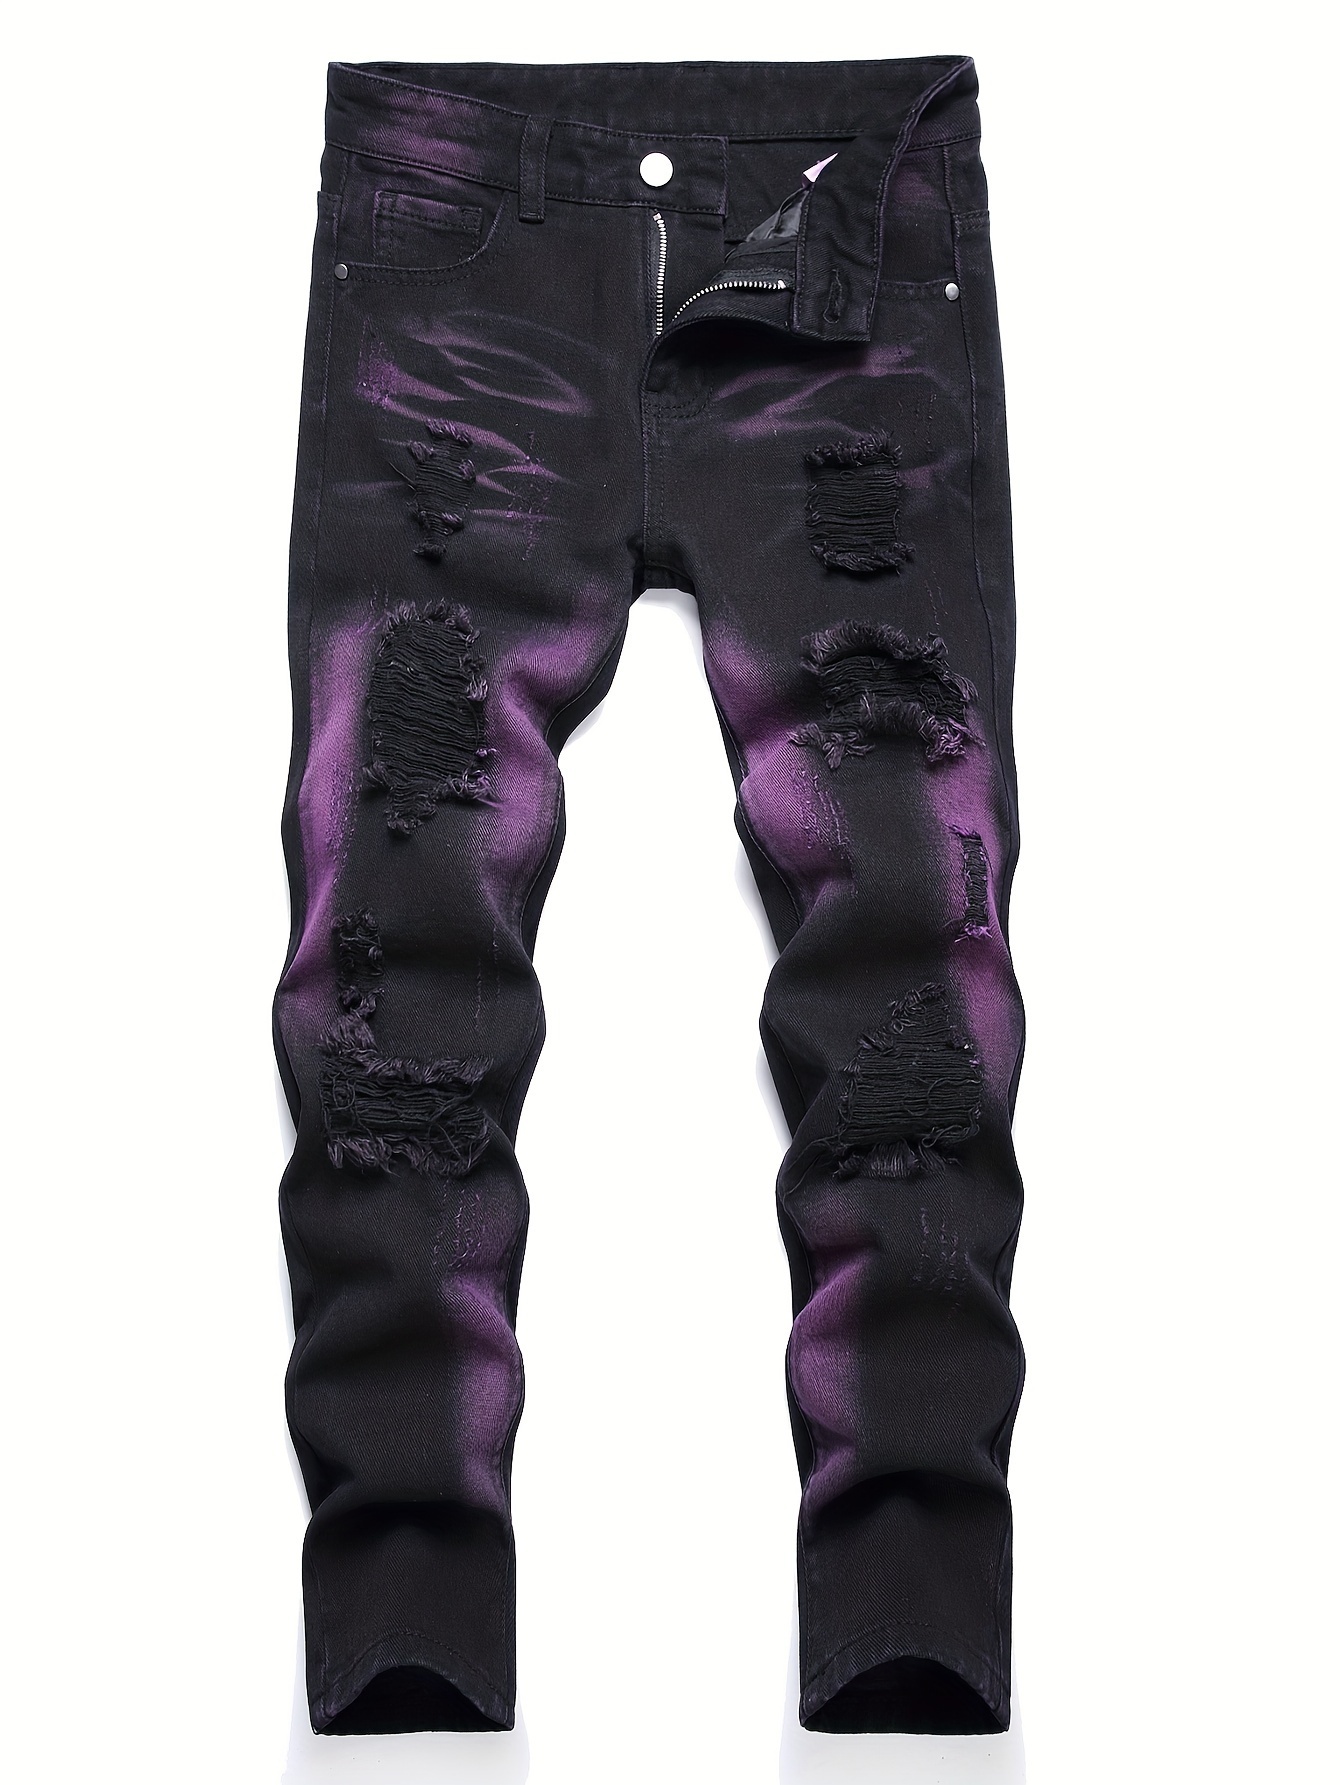 Purple Jeans Women With Tag Jeans Pour Hommes Long Skinny Slim Mid Zipper  Fly Hole Denim Jeans Purple Jeans Black Designer Pants Men Flared Jeans  From Jeansjackethoodie, $44.78